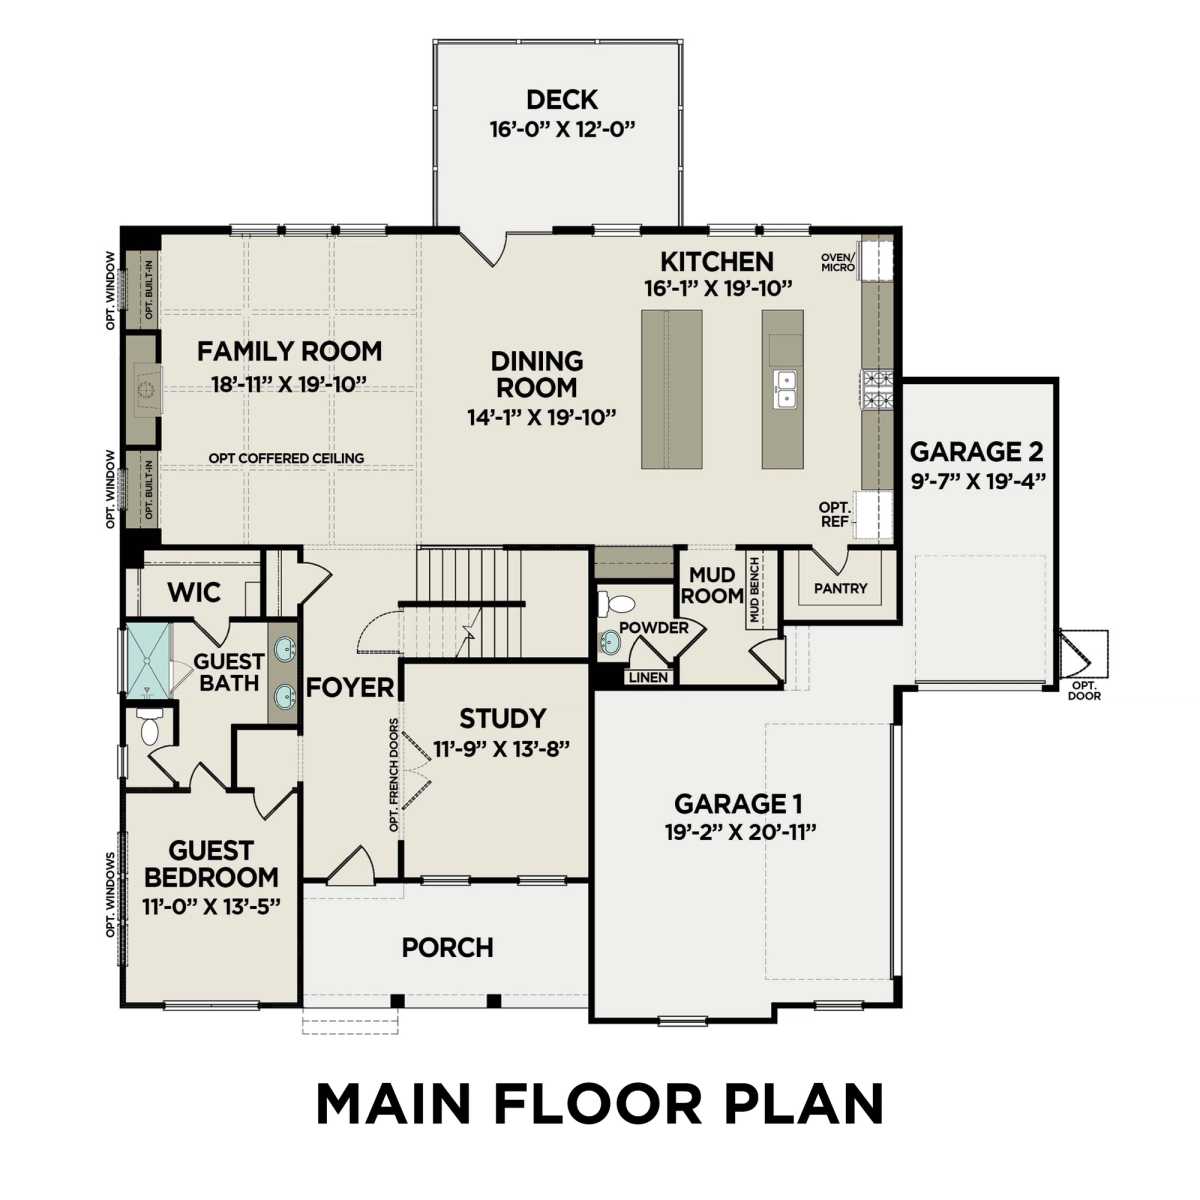 1 - The Arlington B buildable floor plan layout in Davidson Homes' Tanglewood community.